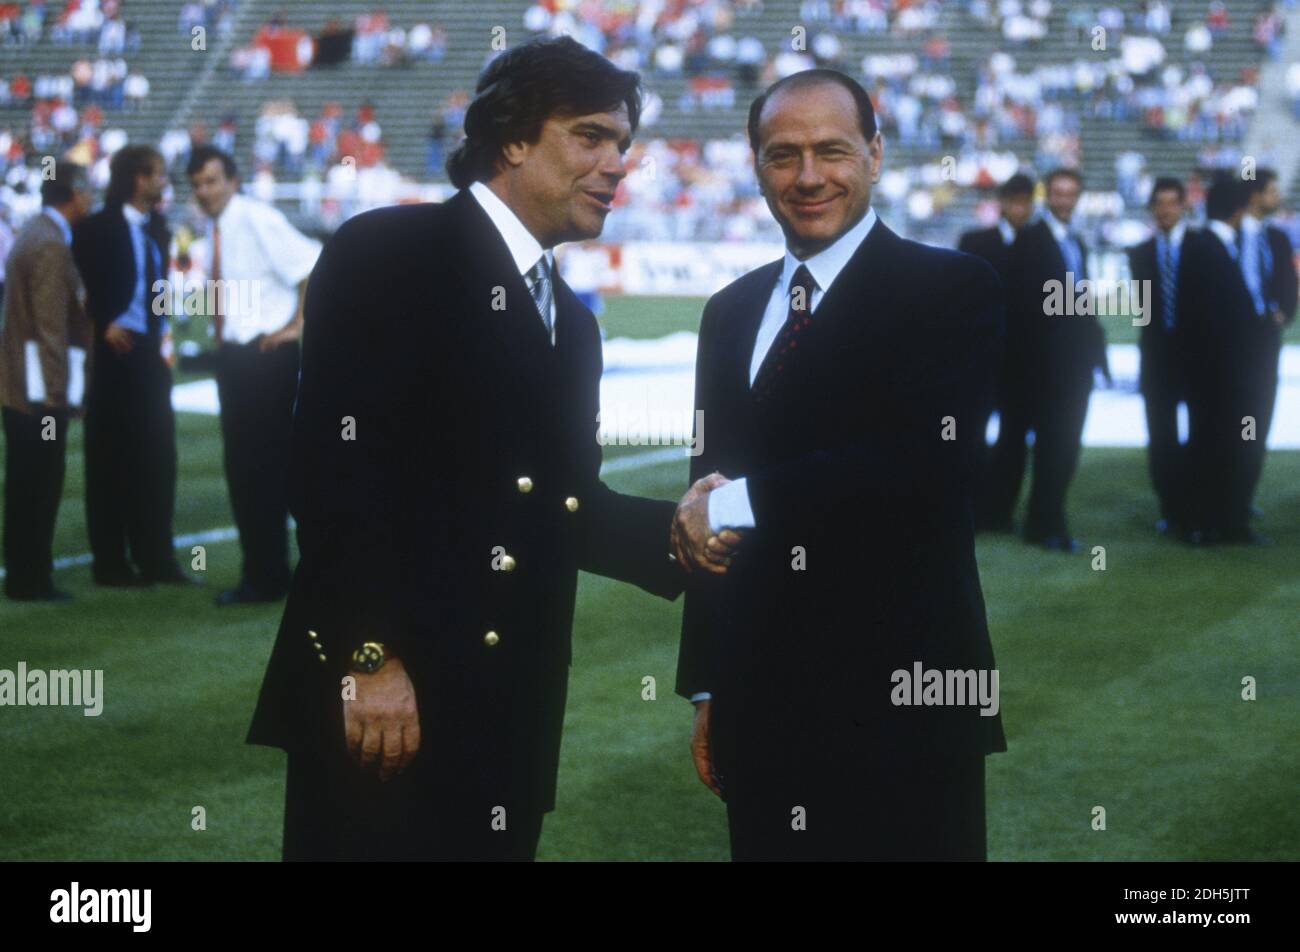 Marseille's President Bernard Tapie greeting Milan AC's President Silvio  Berlusconi during the Champions's League Final soccer match, Marseille vs  Milan A.C. in Stade Olympique, Munich, Germany on May 26th, 1993. Marseille  won